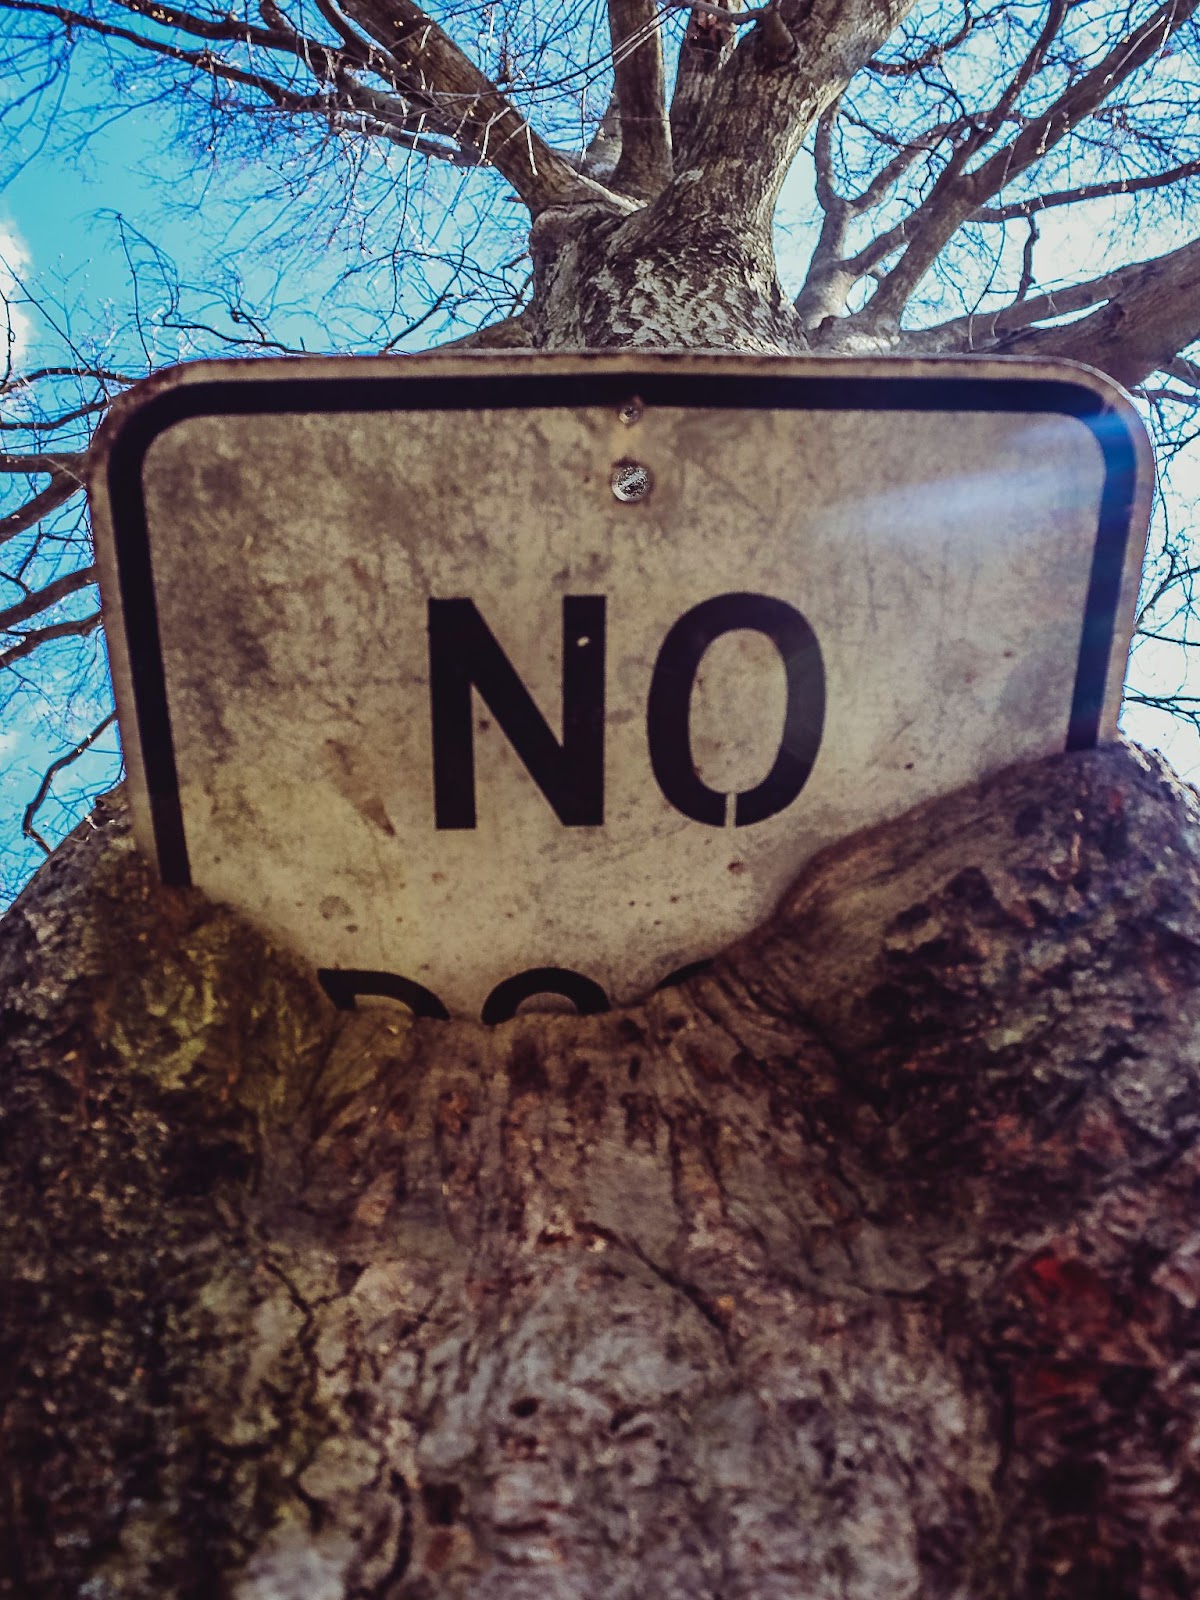 A road sign saying “No” surrounded by a tree that has grown around it.